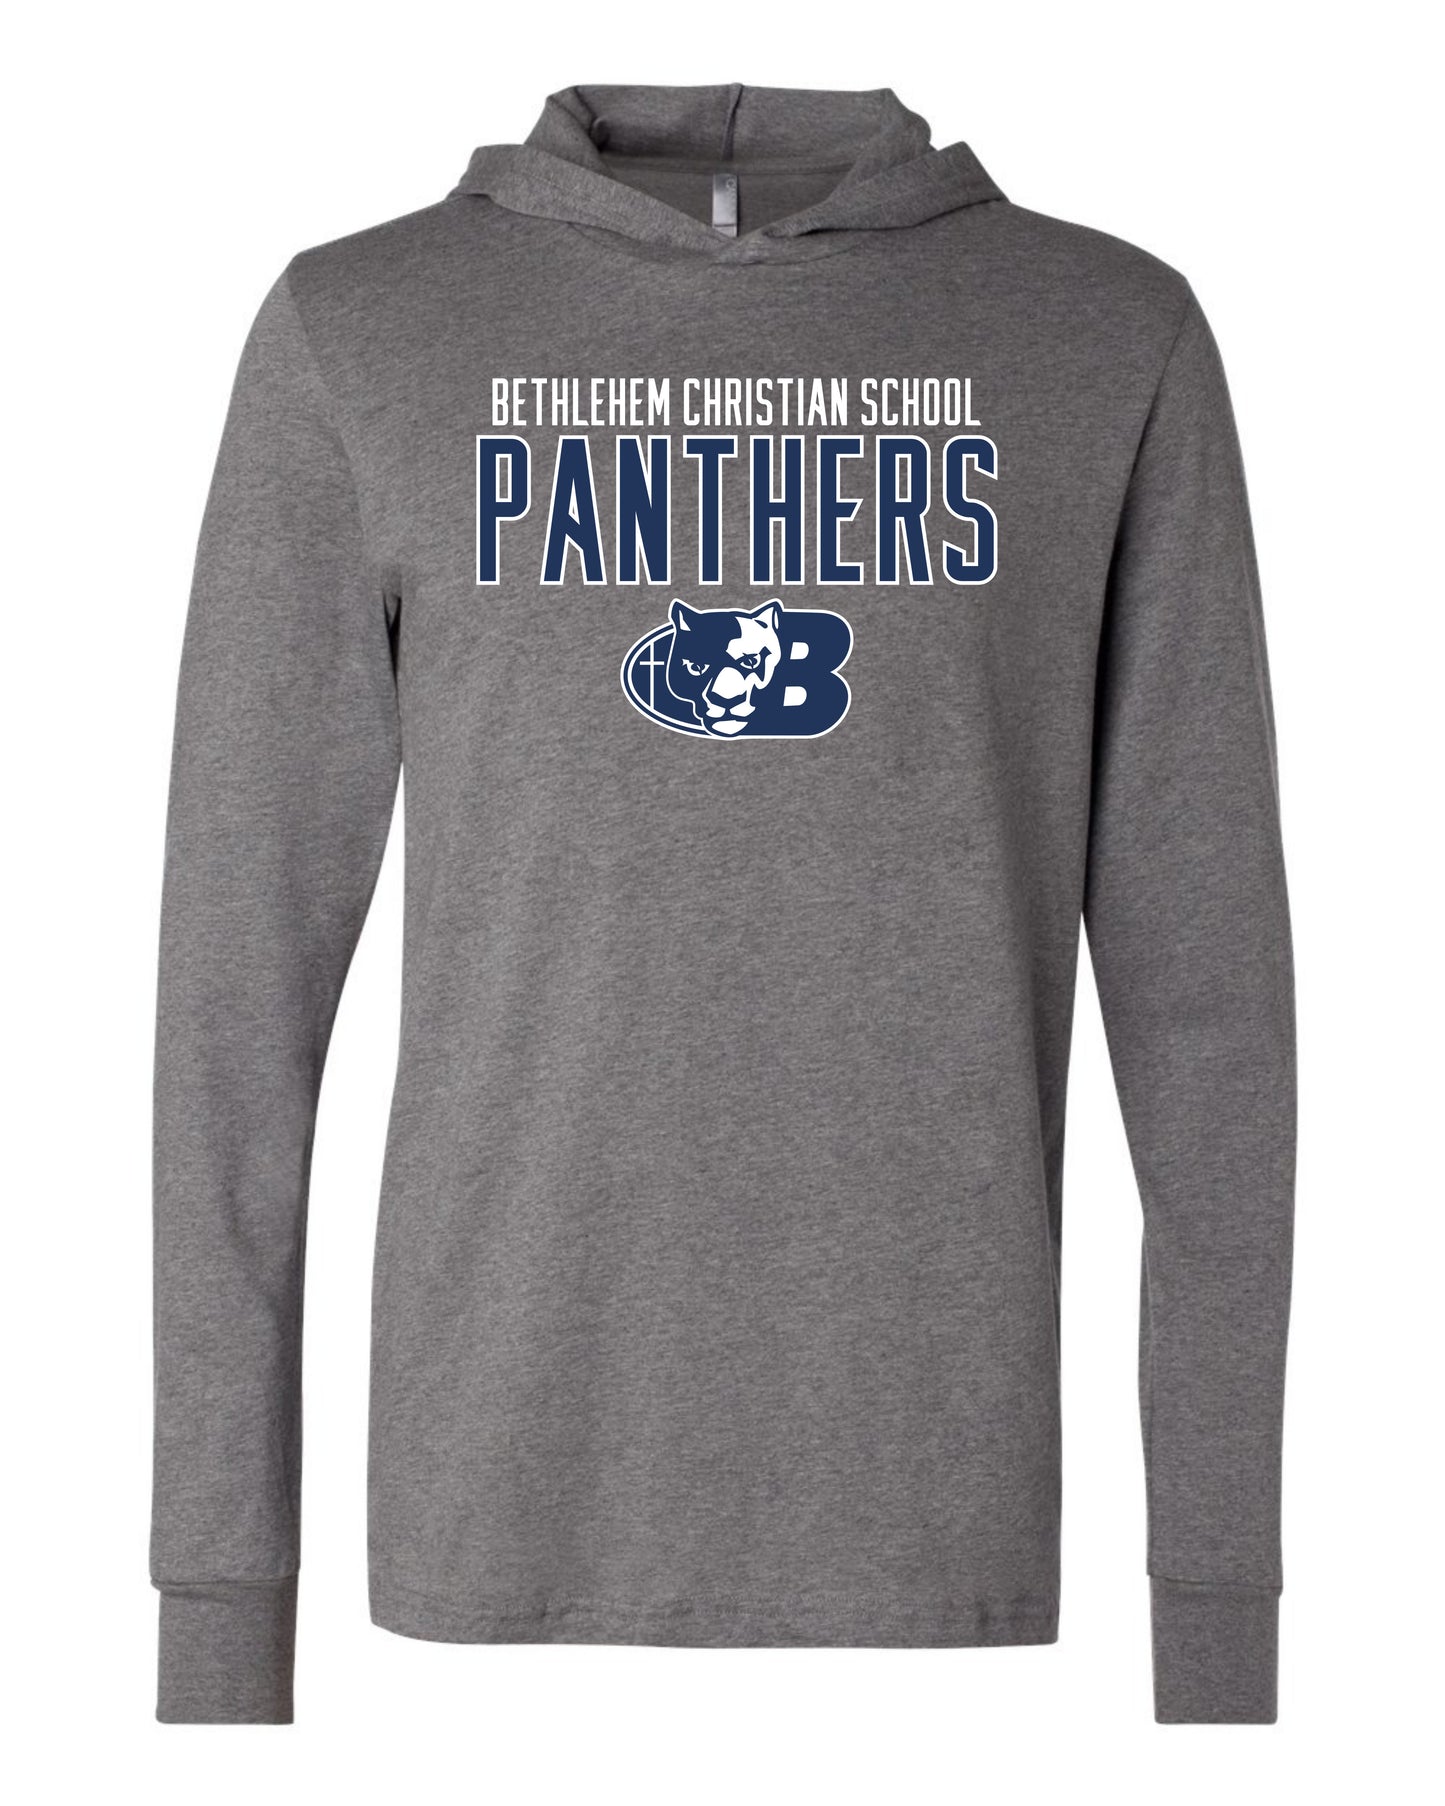 BCS Panthers - Adult Hooded Long Sleeve